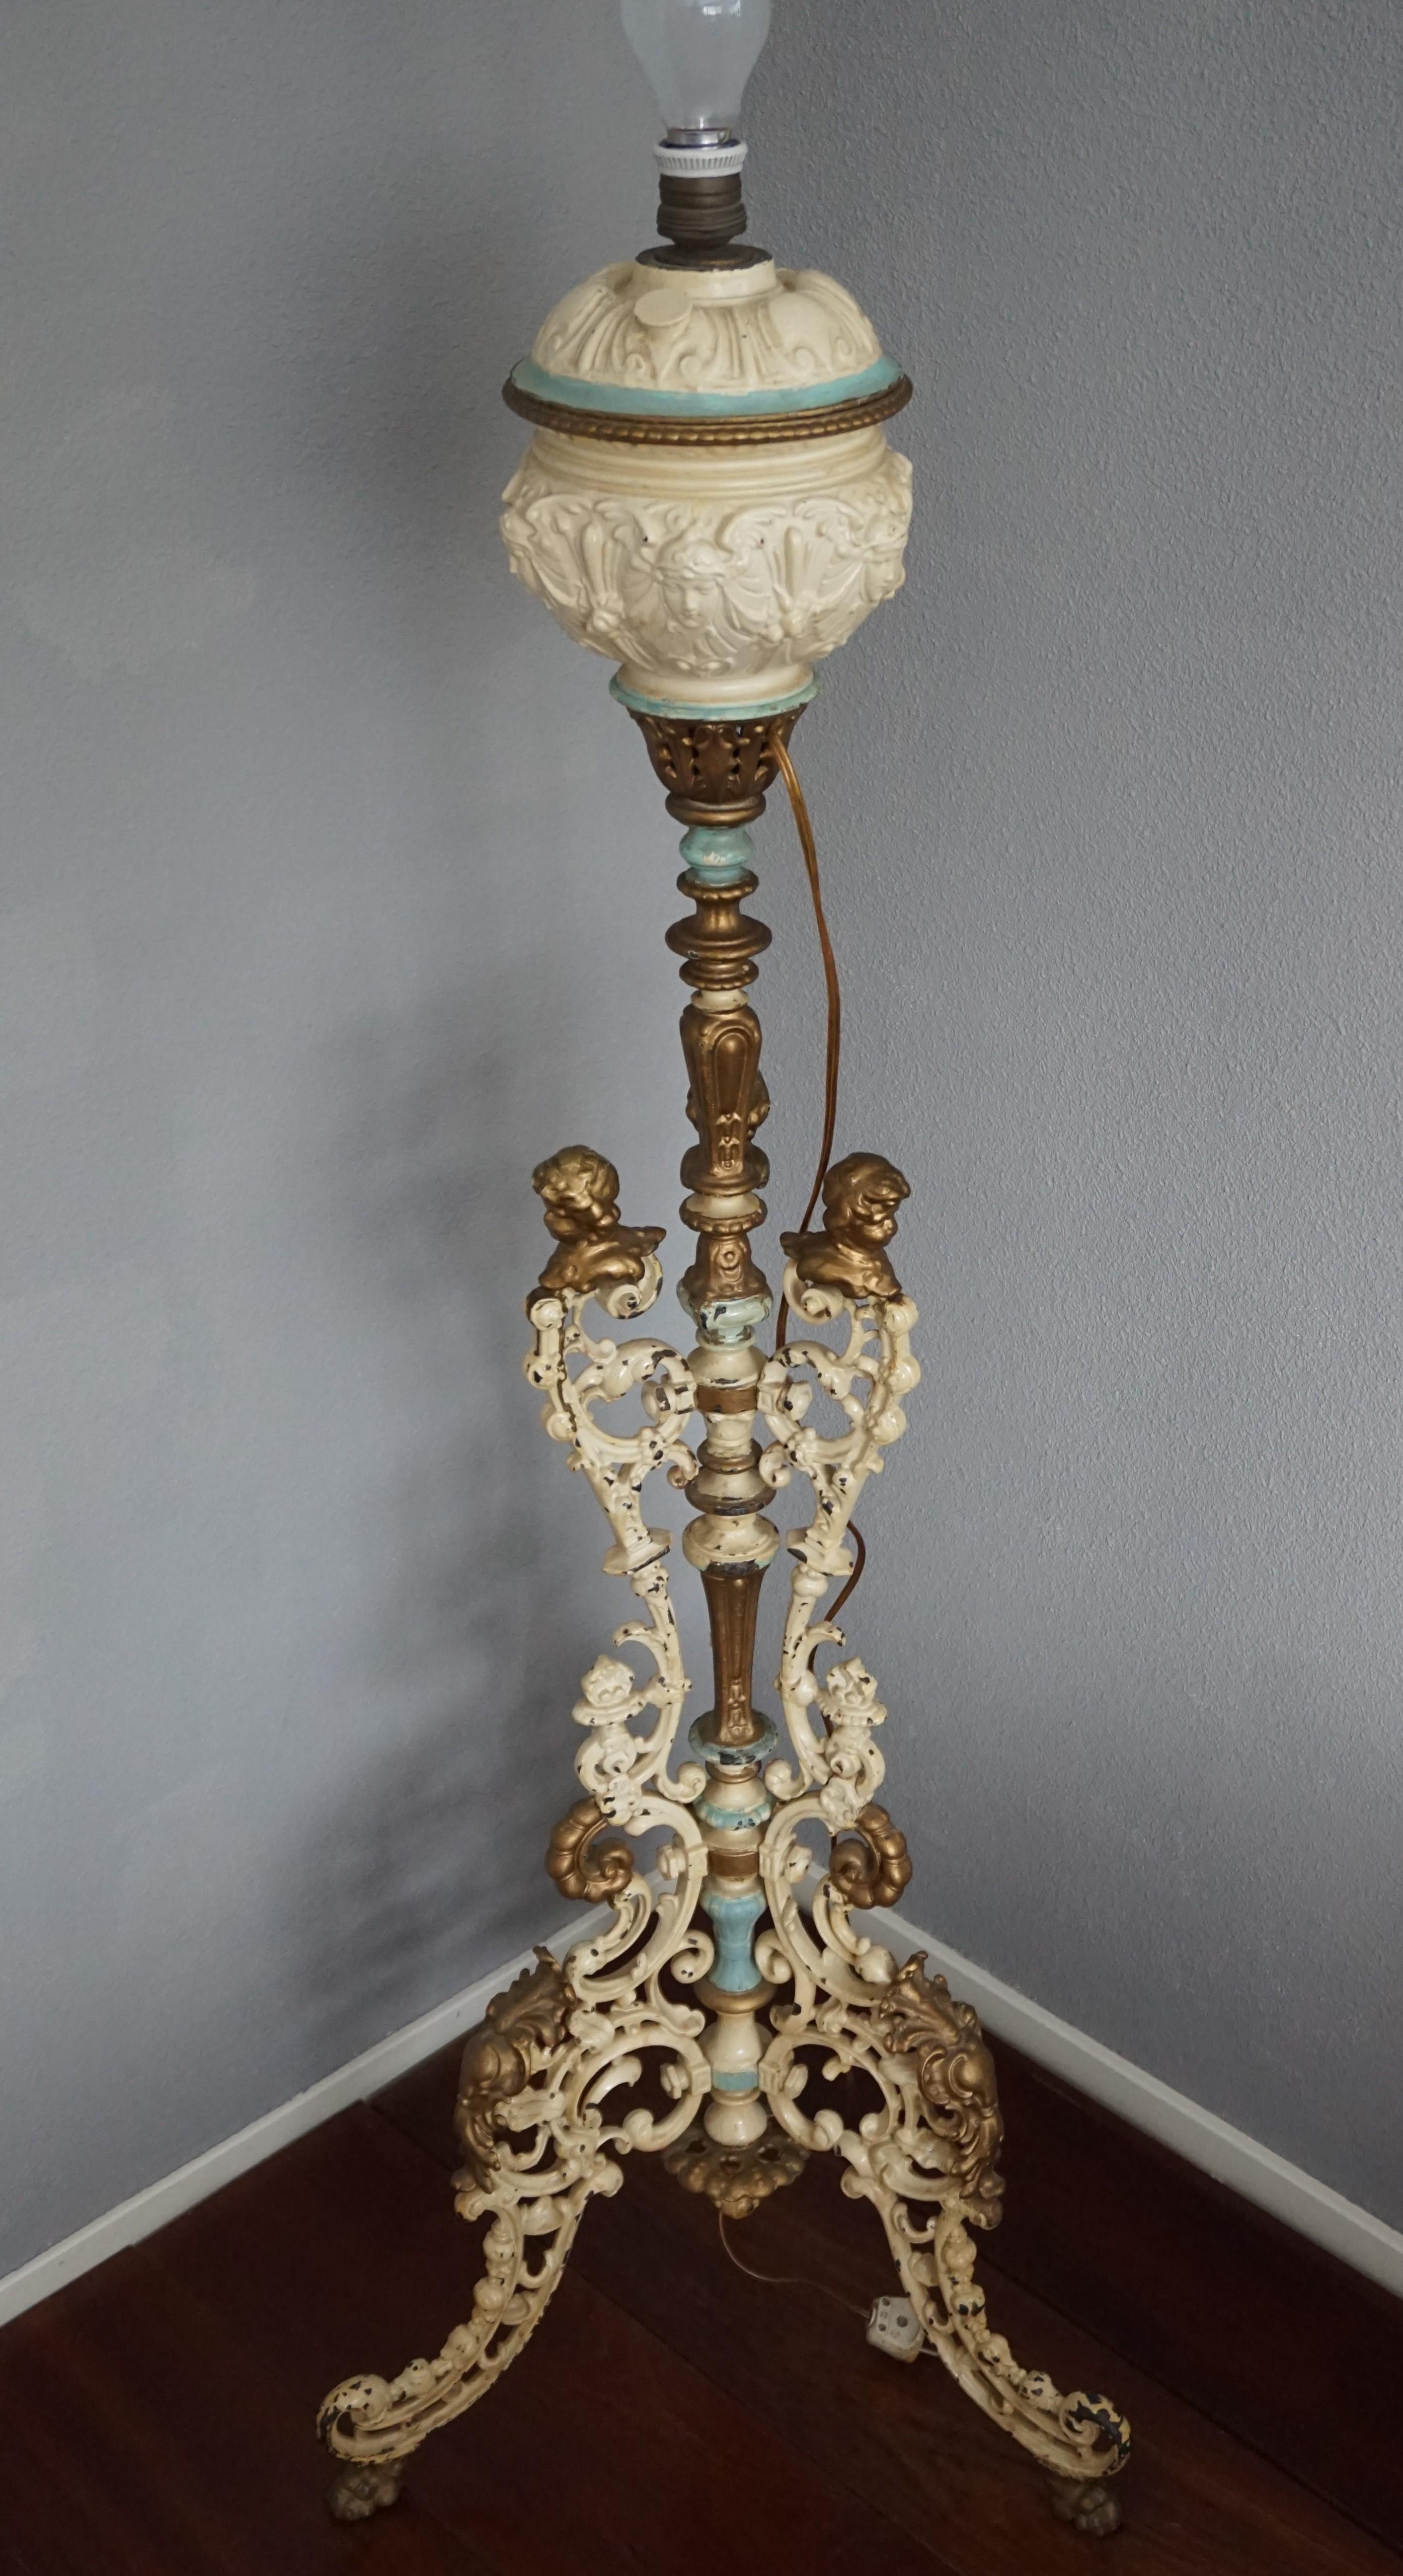 Rare and very decorative, handcrafted floor lamp (former oil lamp).

If you have an appetite for rare, ornate and highly decorative antiques then this rare floor lamp could be gracing your home soon. Also thanks to its wide enough and striking